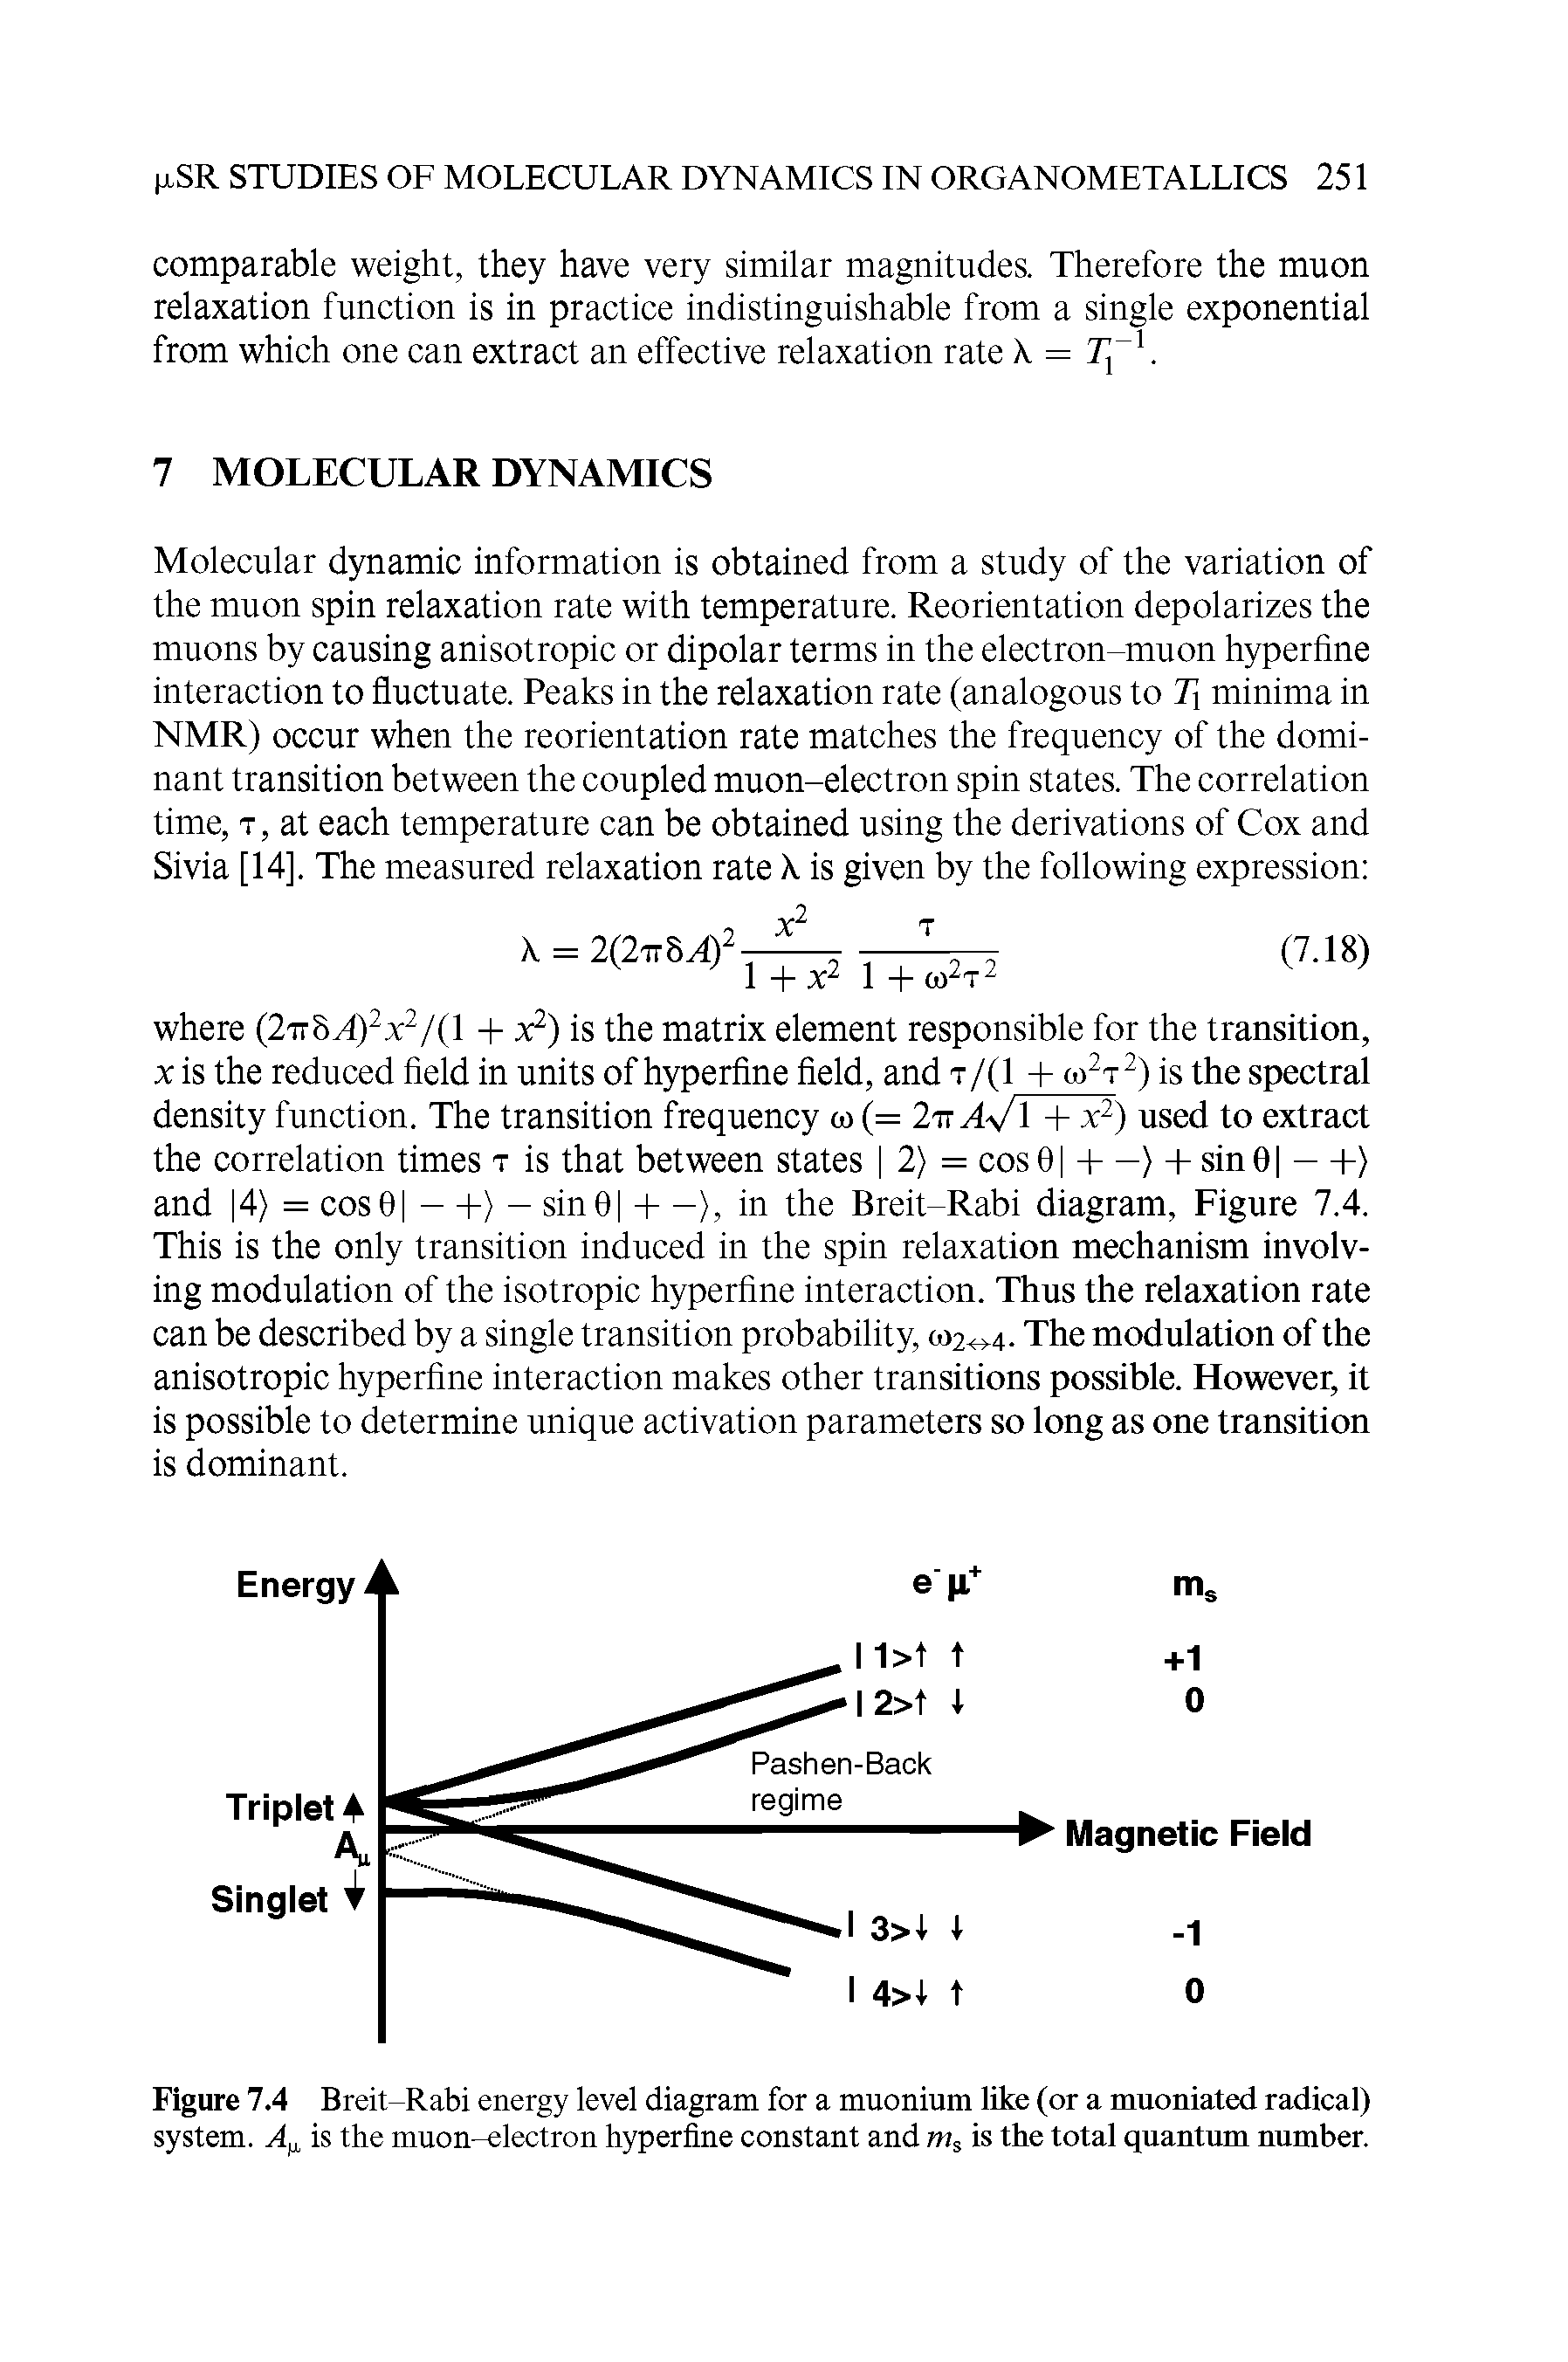 Figure 7.4 Breit-Rabi energy level diagram for a muonium like (or a muoniated radical) system. is the muon-electron hyperflne constant and Ws is the total quantum number.